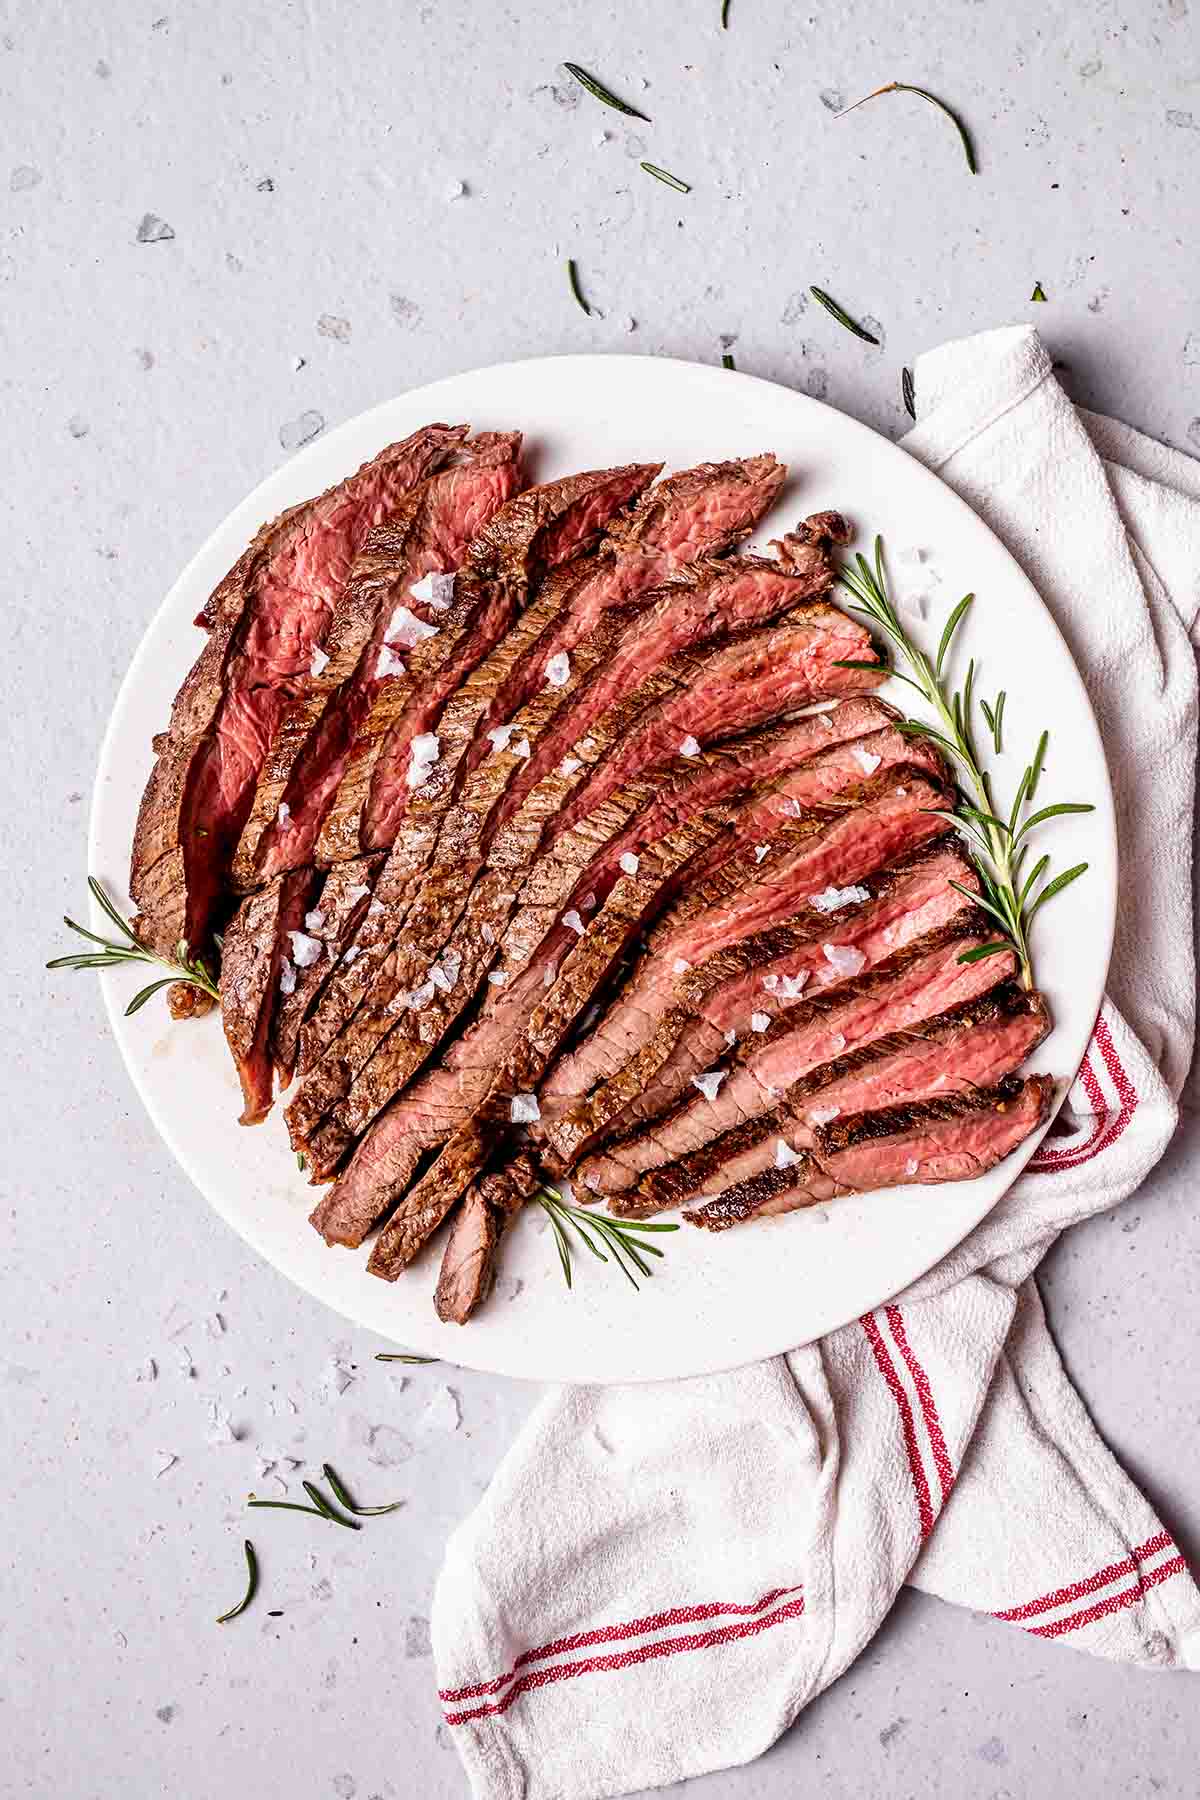 round steak on a plate with fresh herbs.